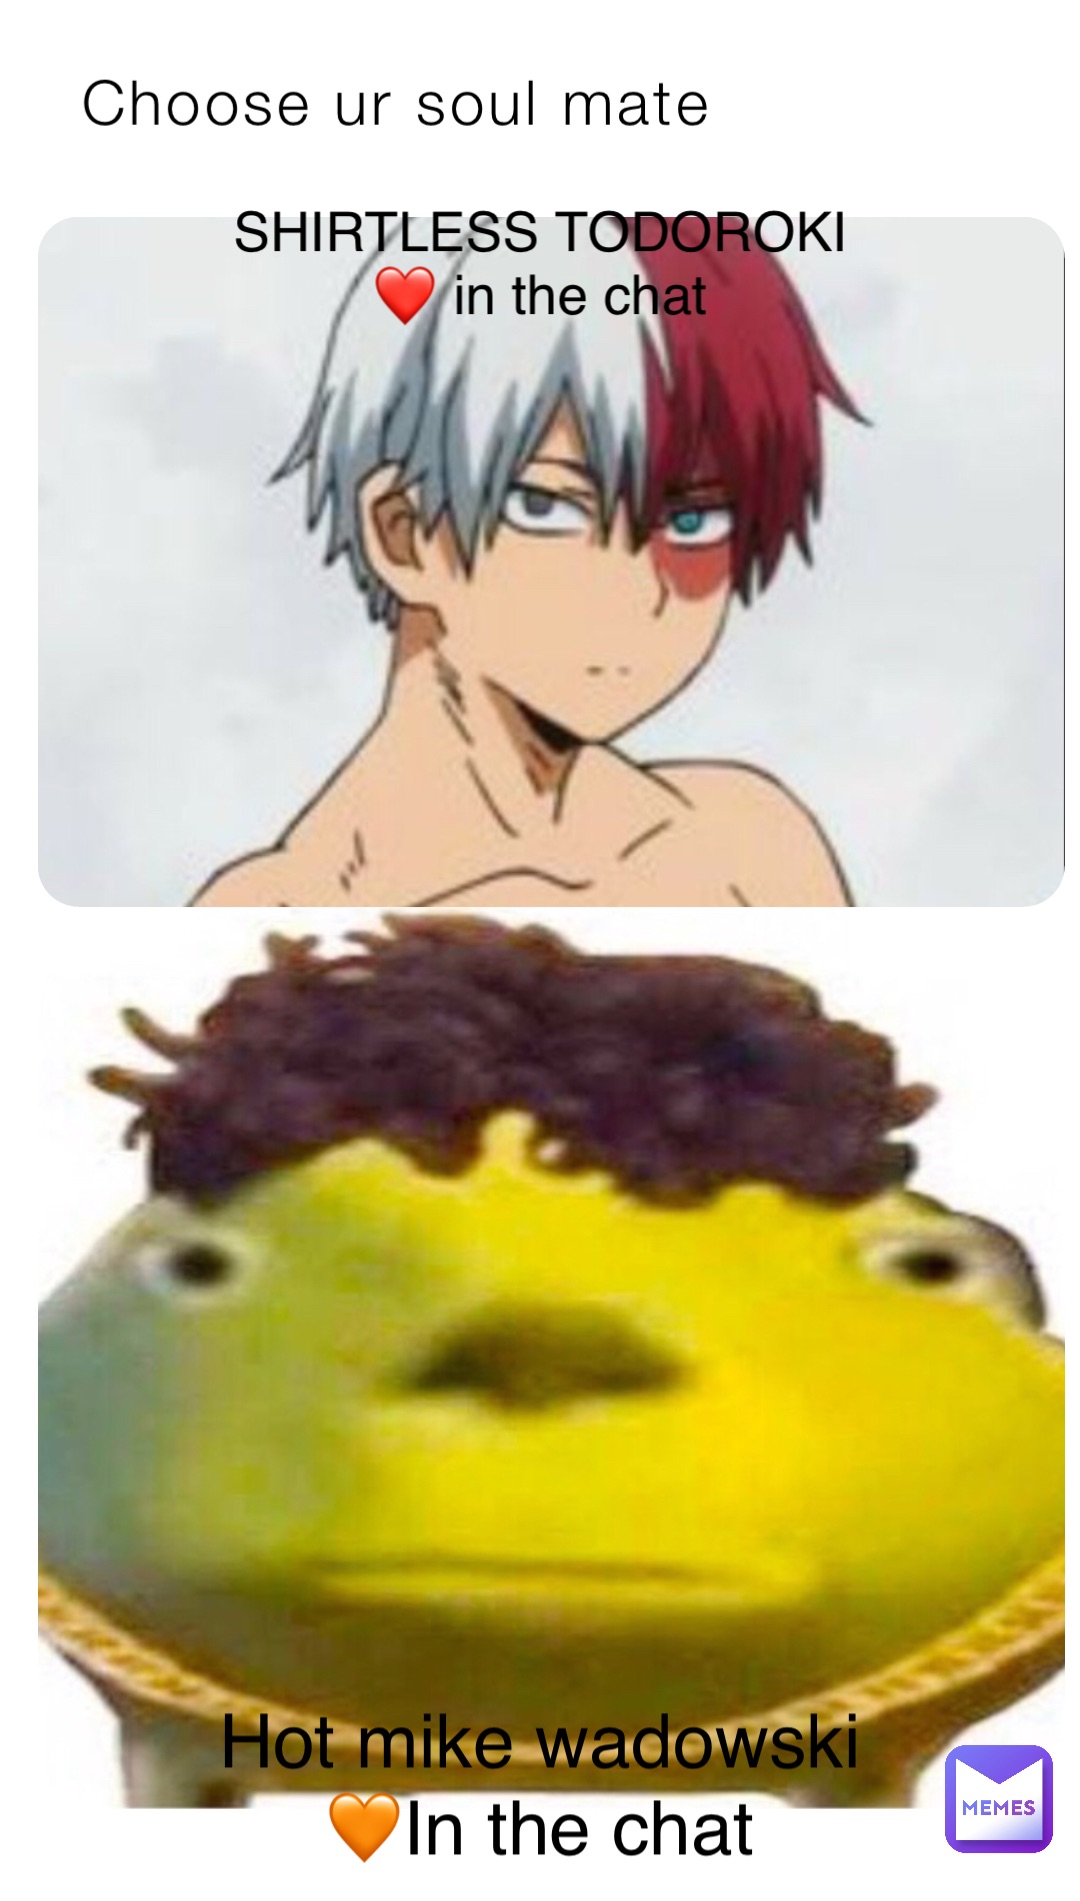 Choose ur soul mate SHIRTLESS TODOROKI 
❤️ in the chat Hot mike wadowski
🧡In the chat